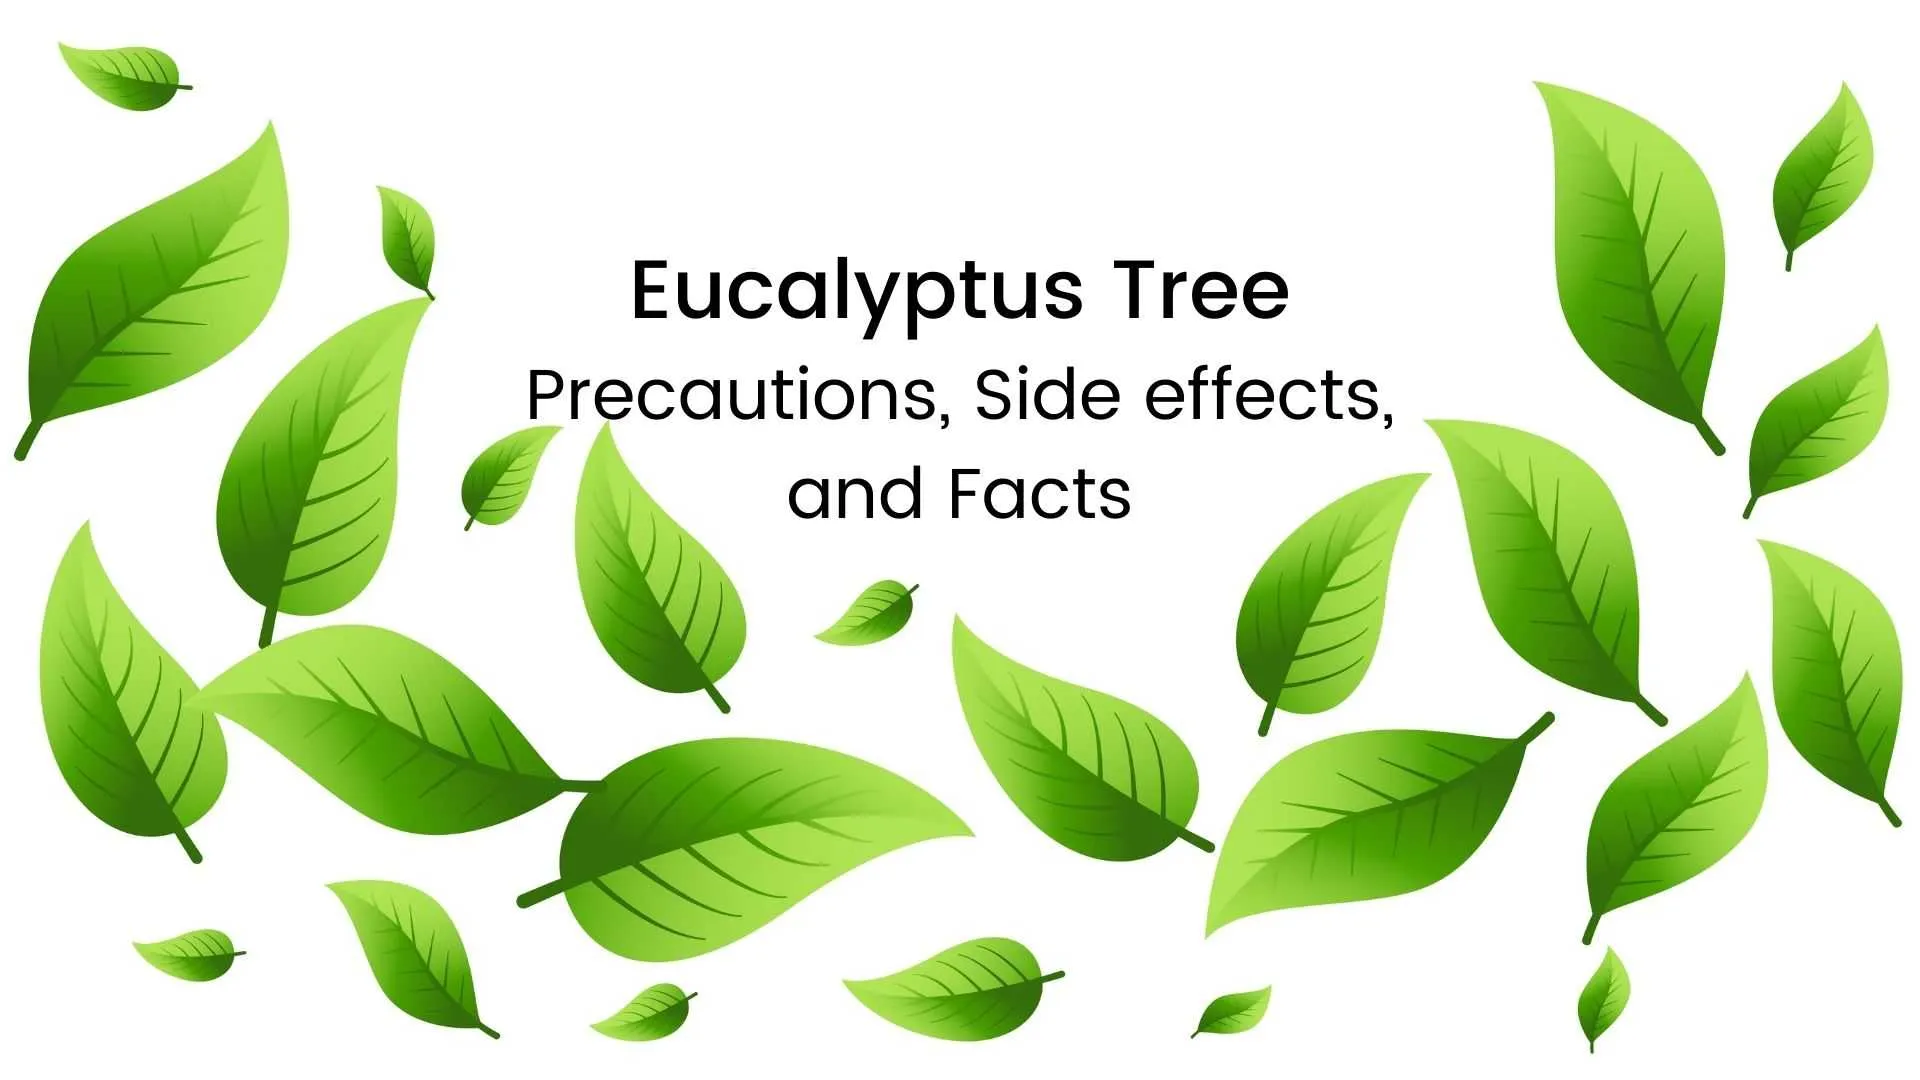 Eucalyptus Tree: Precautions, Side effects, Facts. Is it good for you?